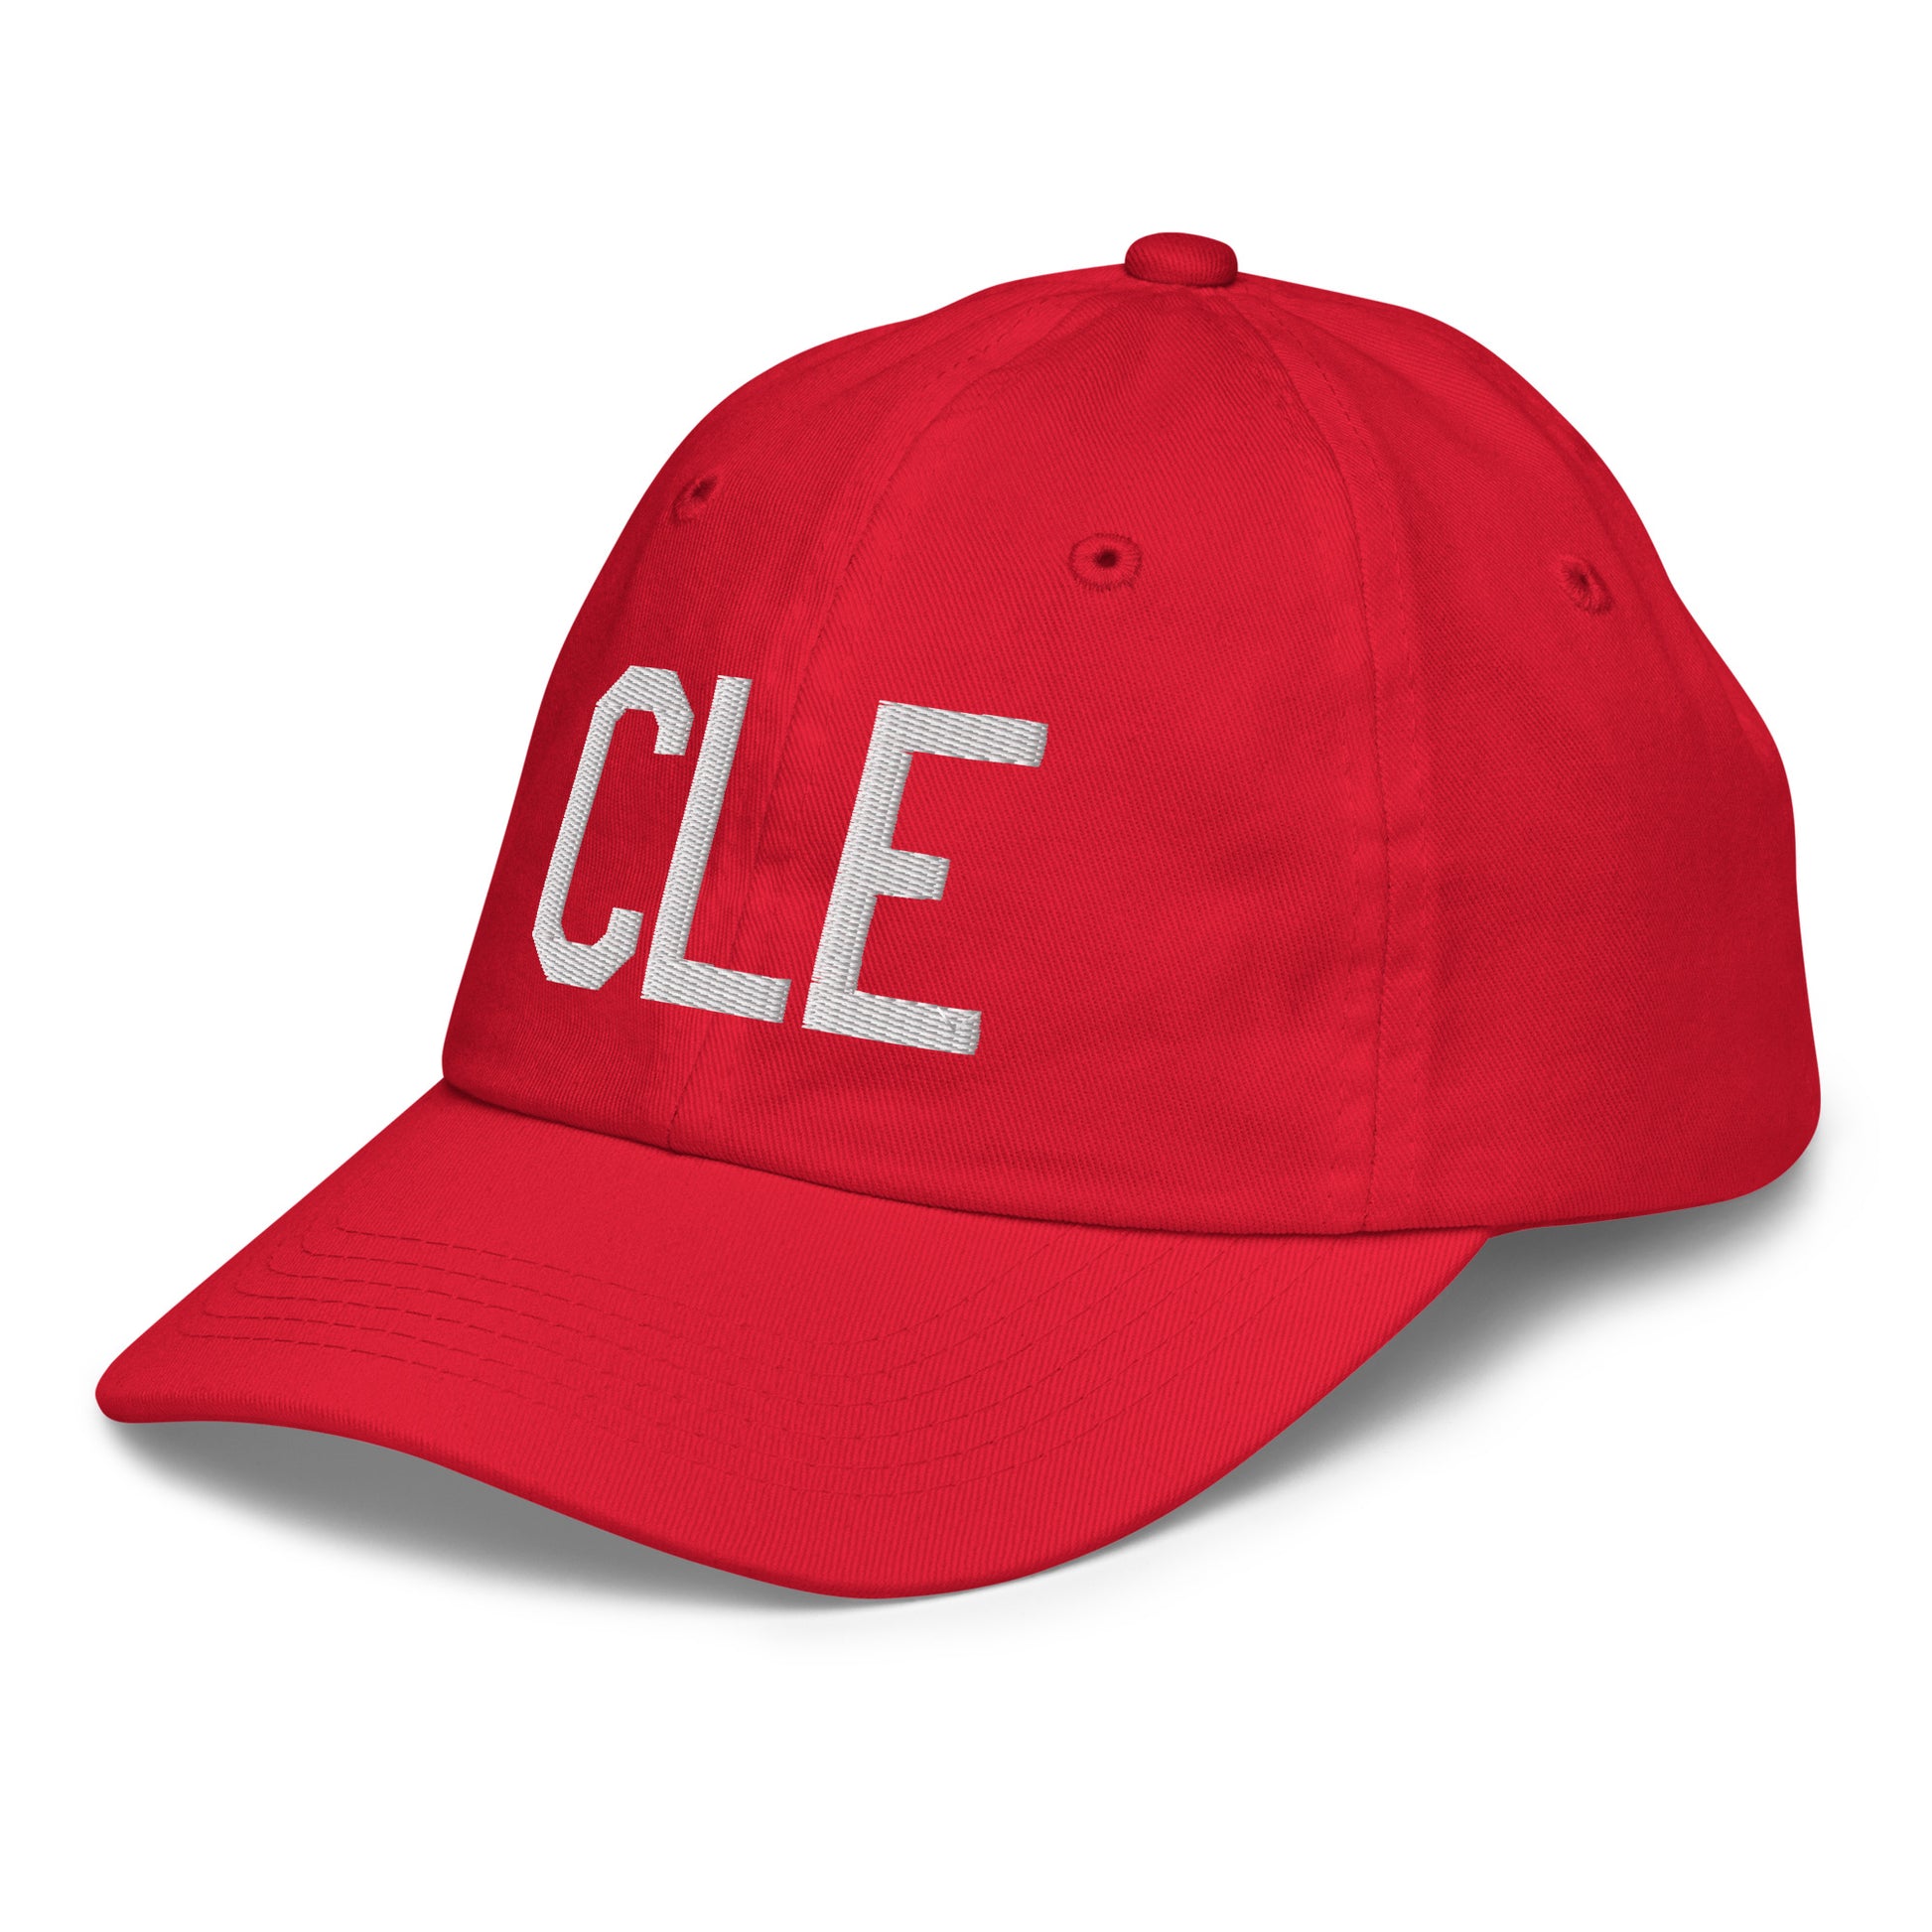 Airport Code Kid's Baseball Cap - White • CLE Cleveland • YHM Designs - Image 19